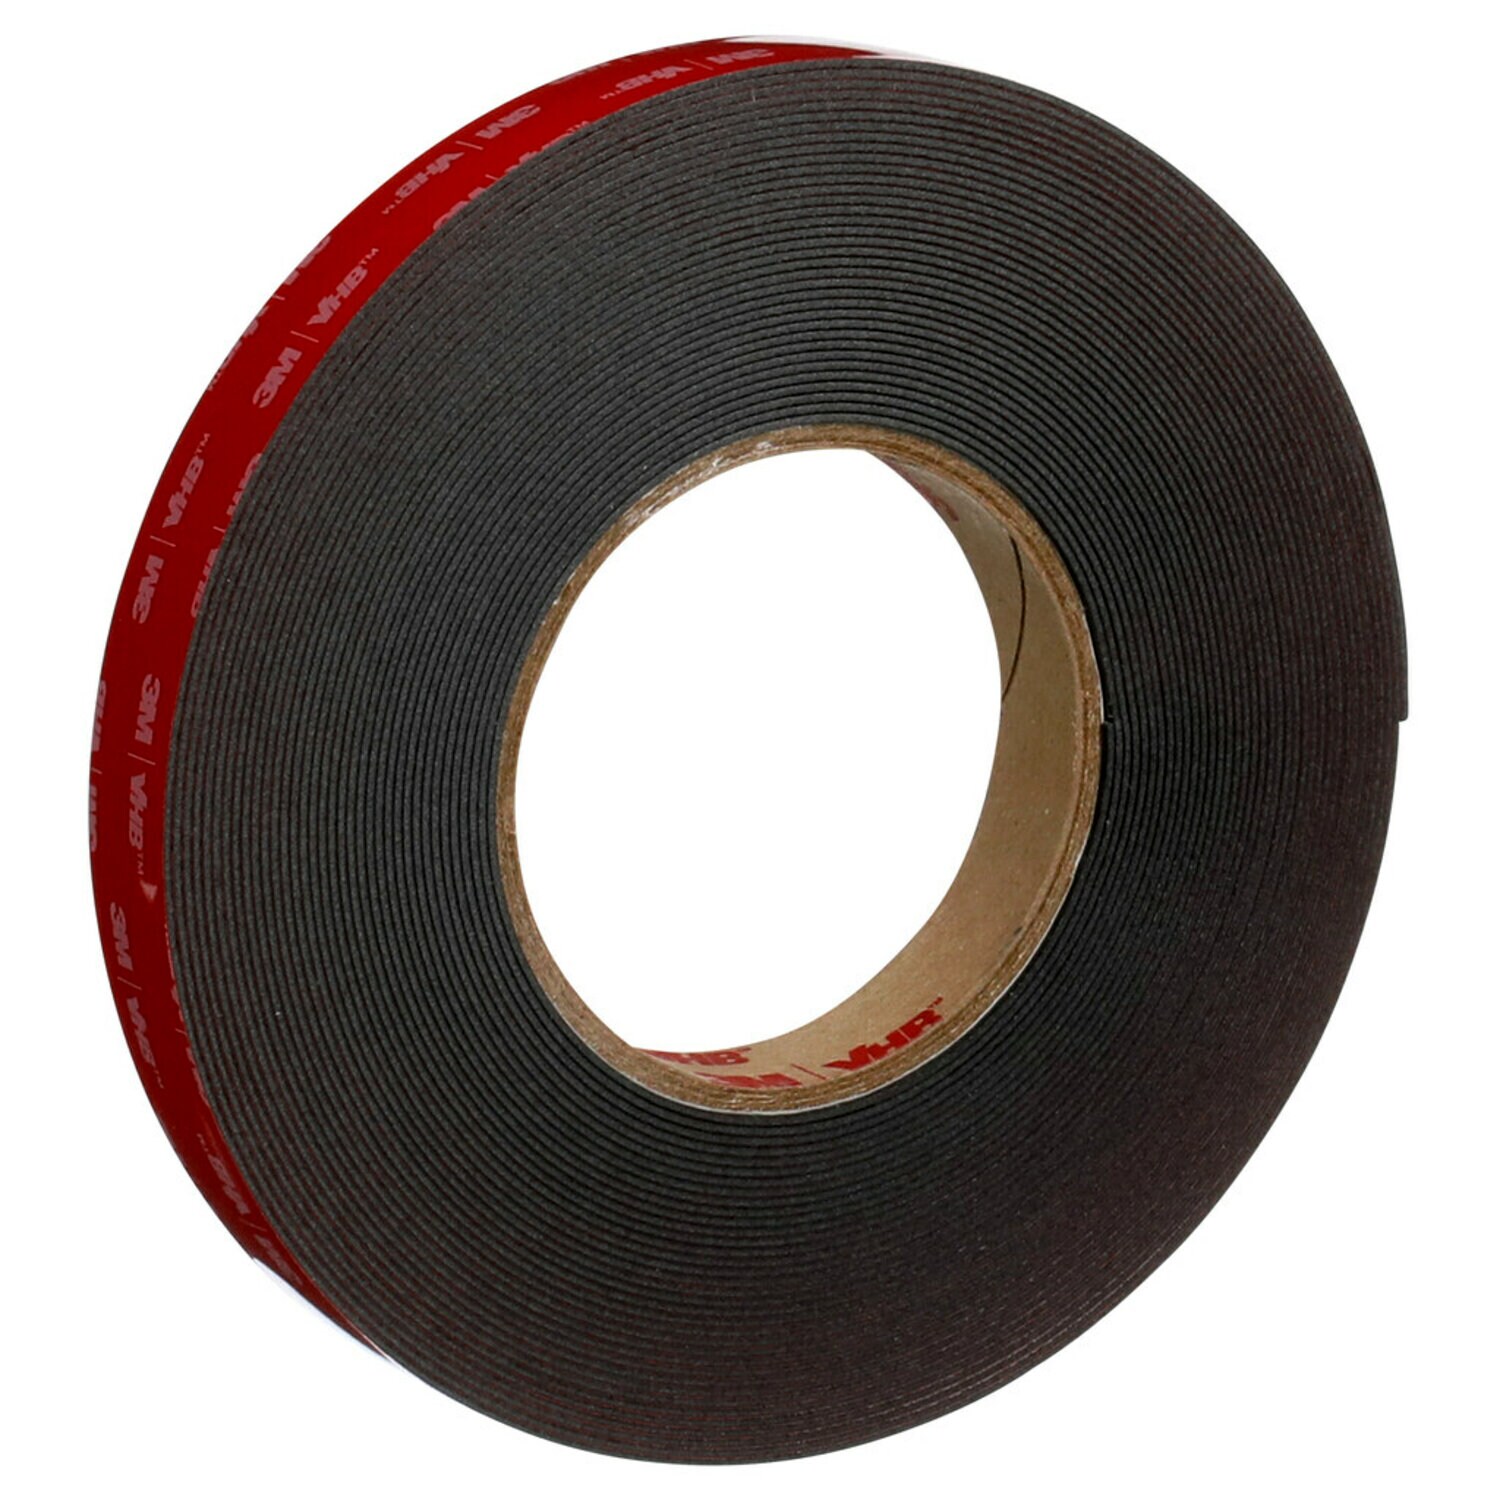 3 Packs Heavy Duty Felt Strip Roll with Adhesive Backing Self Adhesive Felt  Tape Polyester Felt Strip Rolls for Protecting Furniture Hard Surfaces  Black 